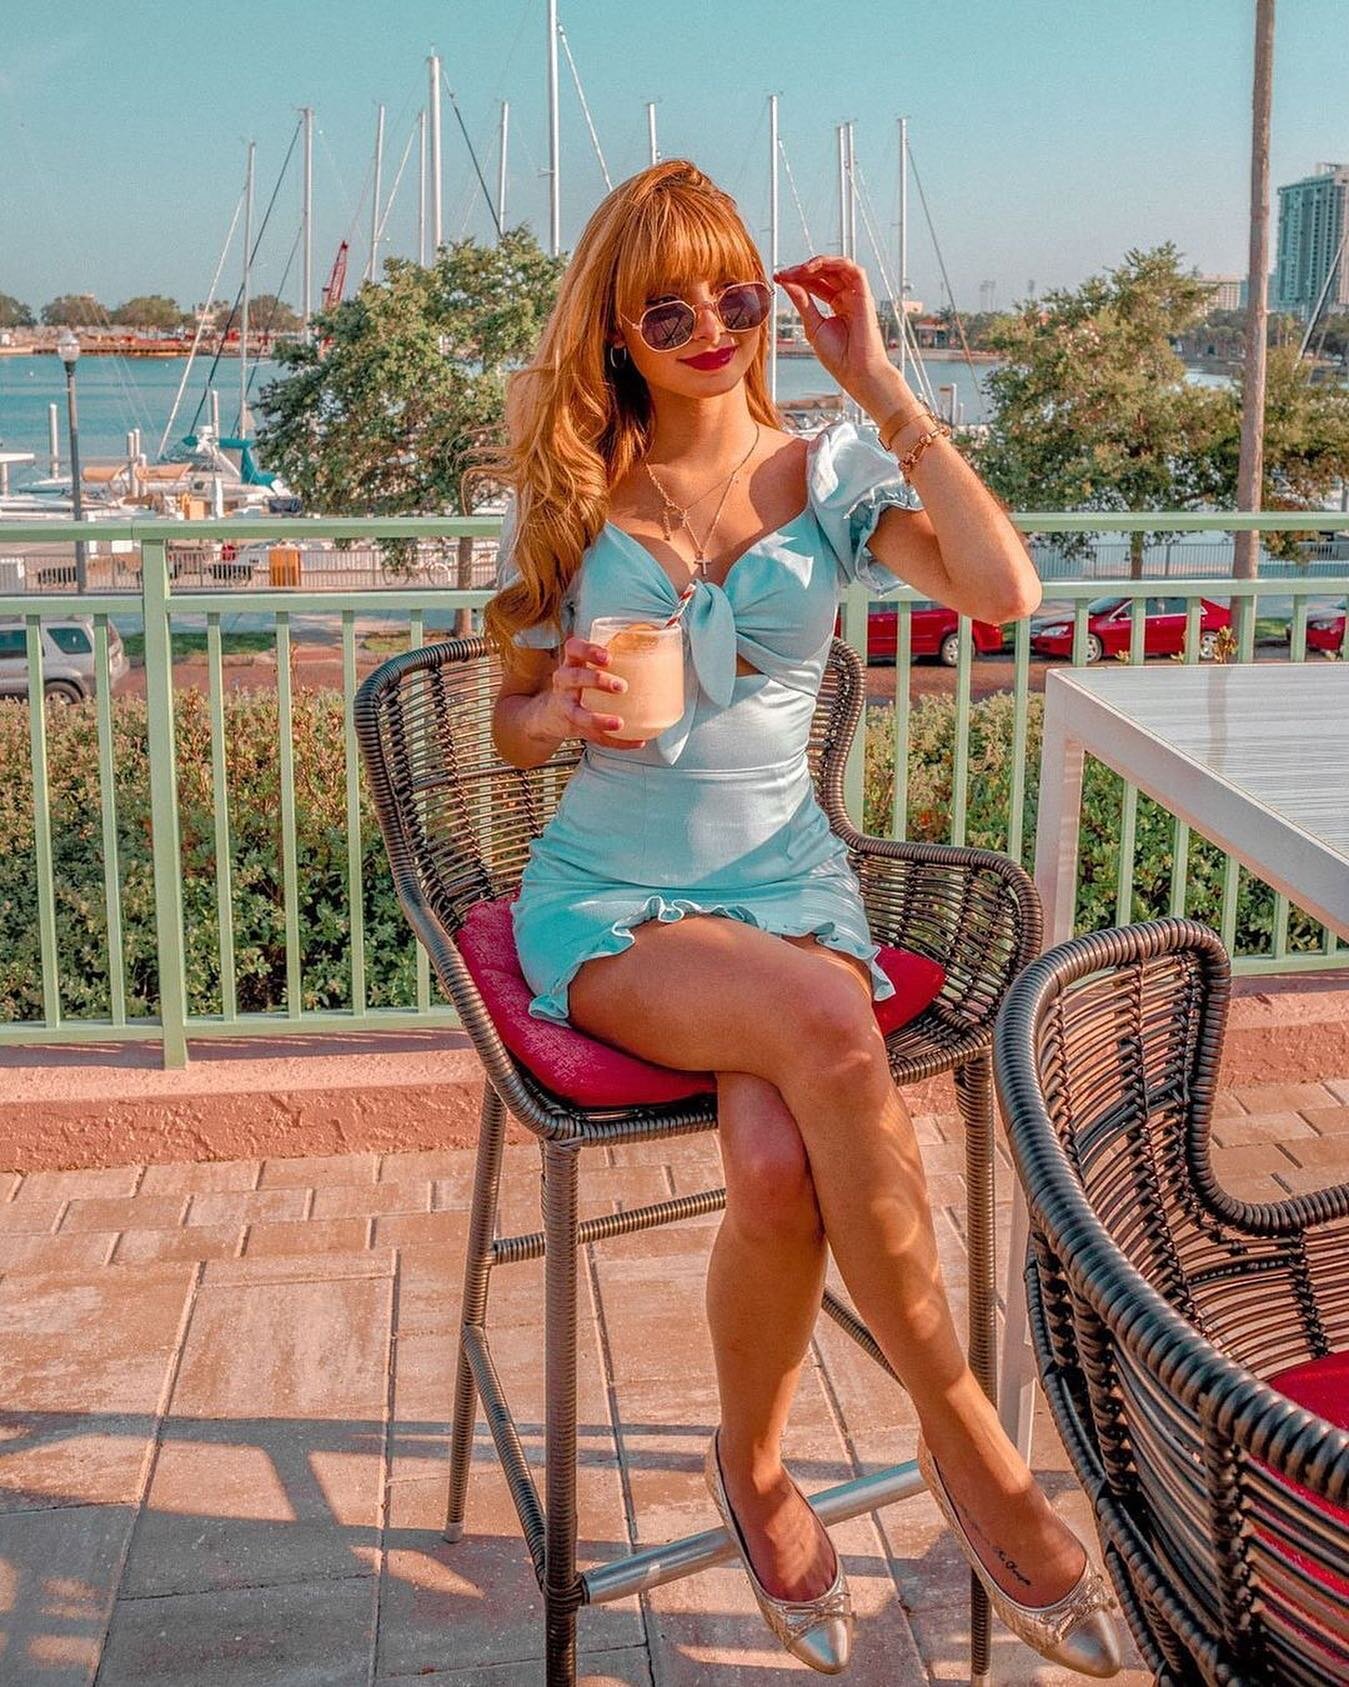 Spring has officially sprung! Soak up the St. Pete sun and this view with a cocktail in hand.

Photo: @jholealoficial